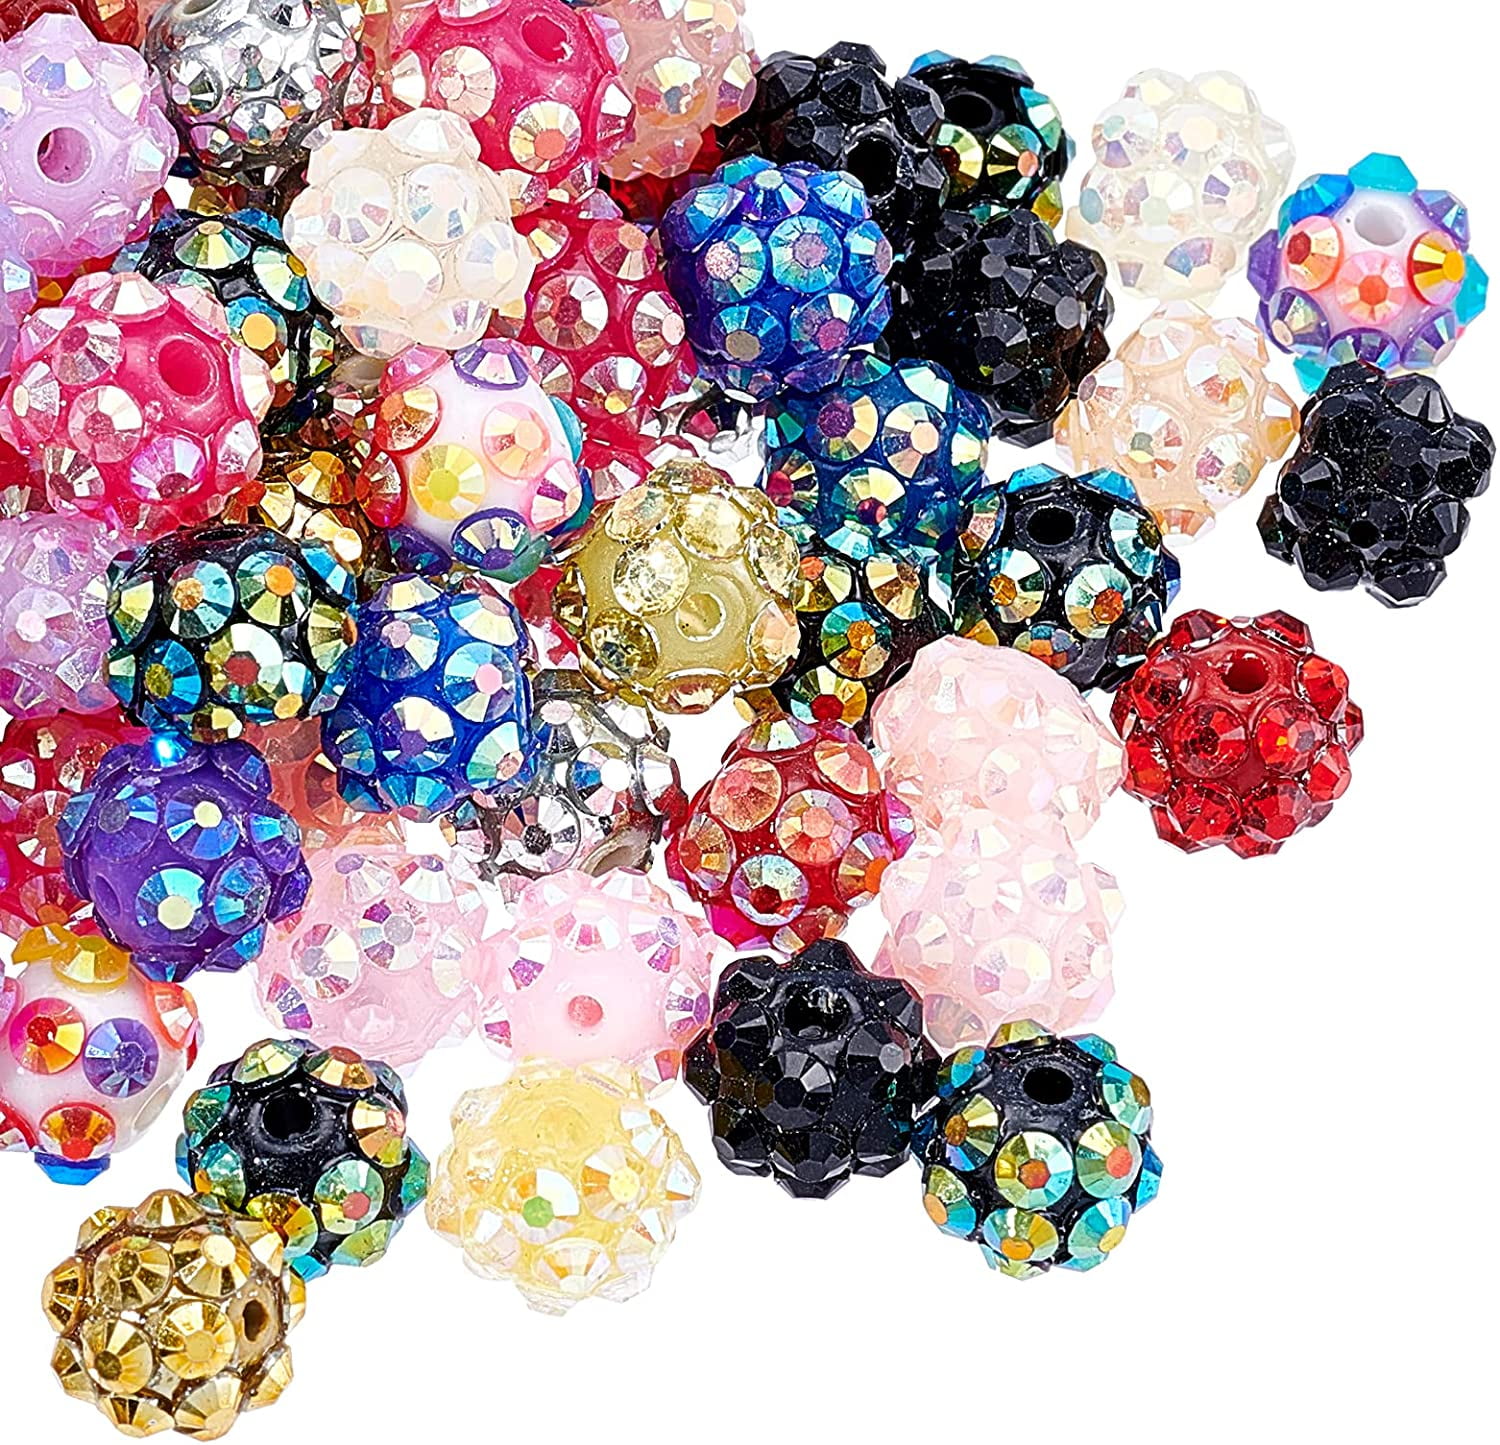 Cheriswelry 100pcs 20mm Round Resin Rhinestone Chunky Bubblegum Ball Beads Crystal Pave Disco Ball Beads Loose Spacer Charms Mixed Color for Jewelry